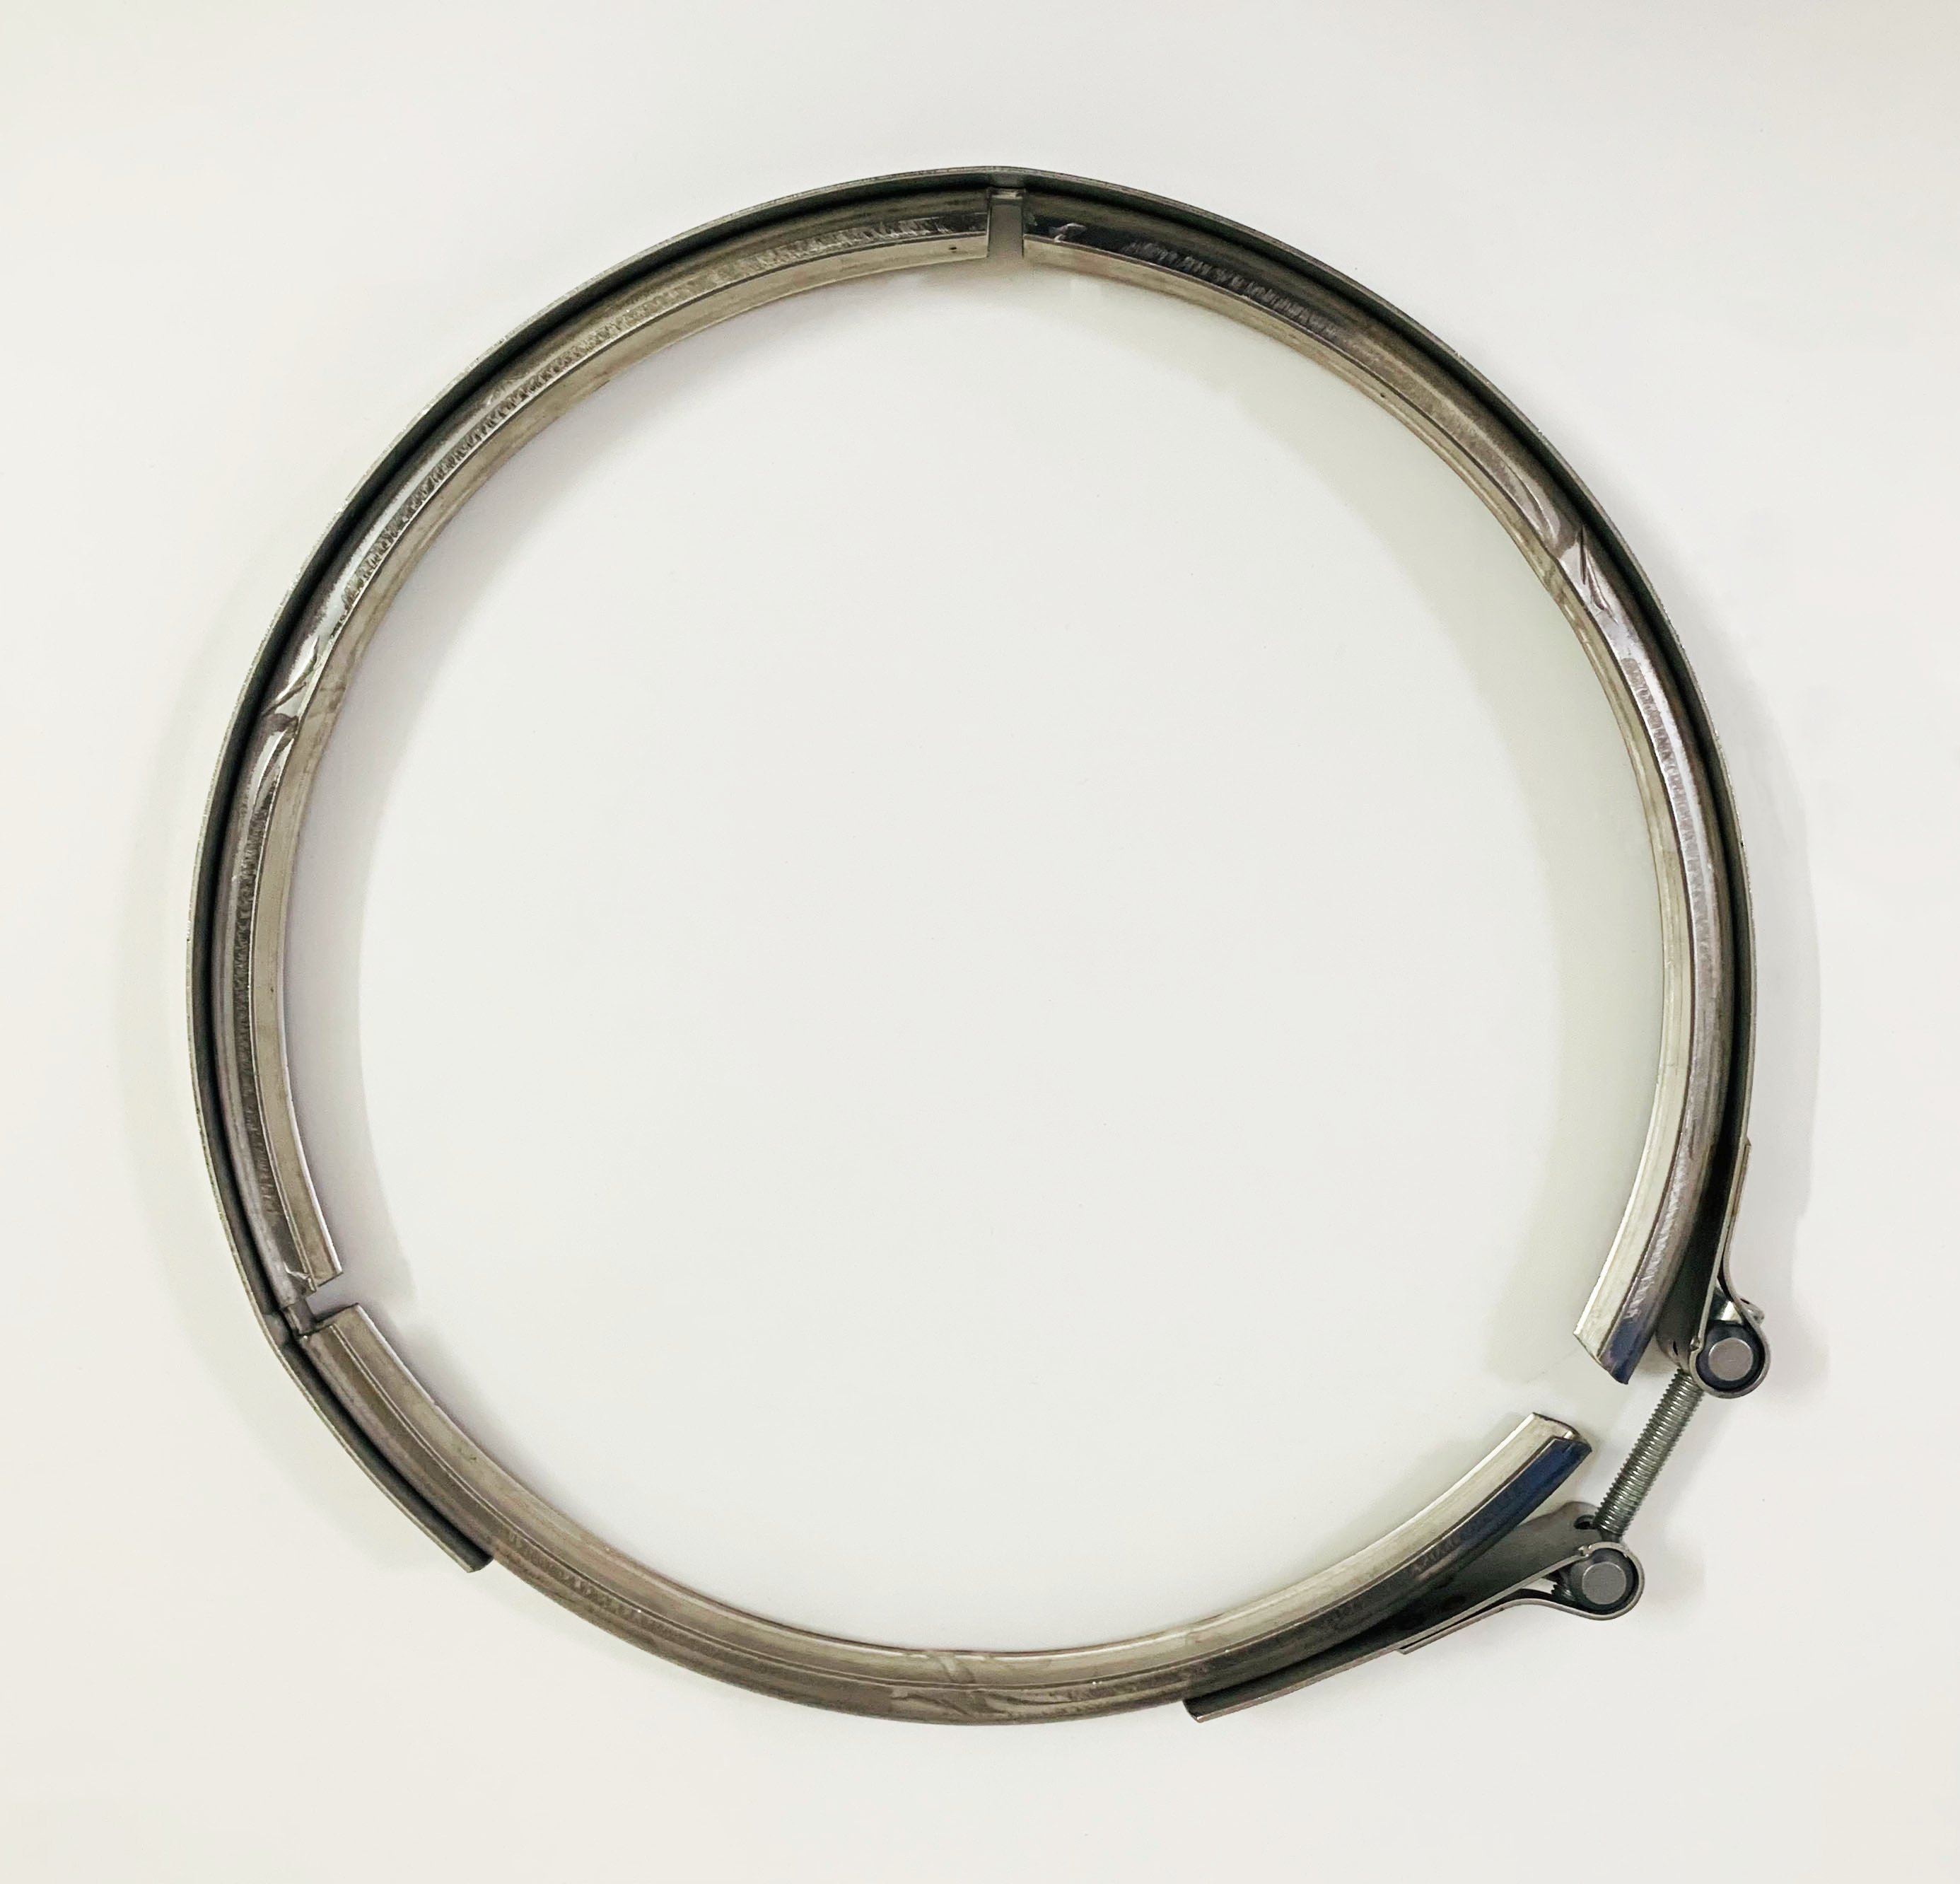 Exhaust Clamp and Gasket Kit for SCANIA Diesel Engine Exhaust Purification System 2137233 2137602 2431439 2137231 